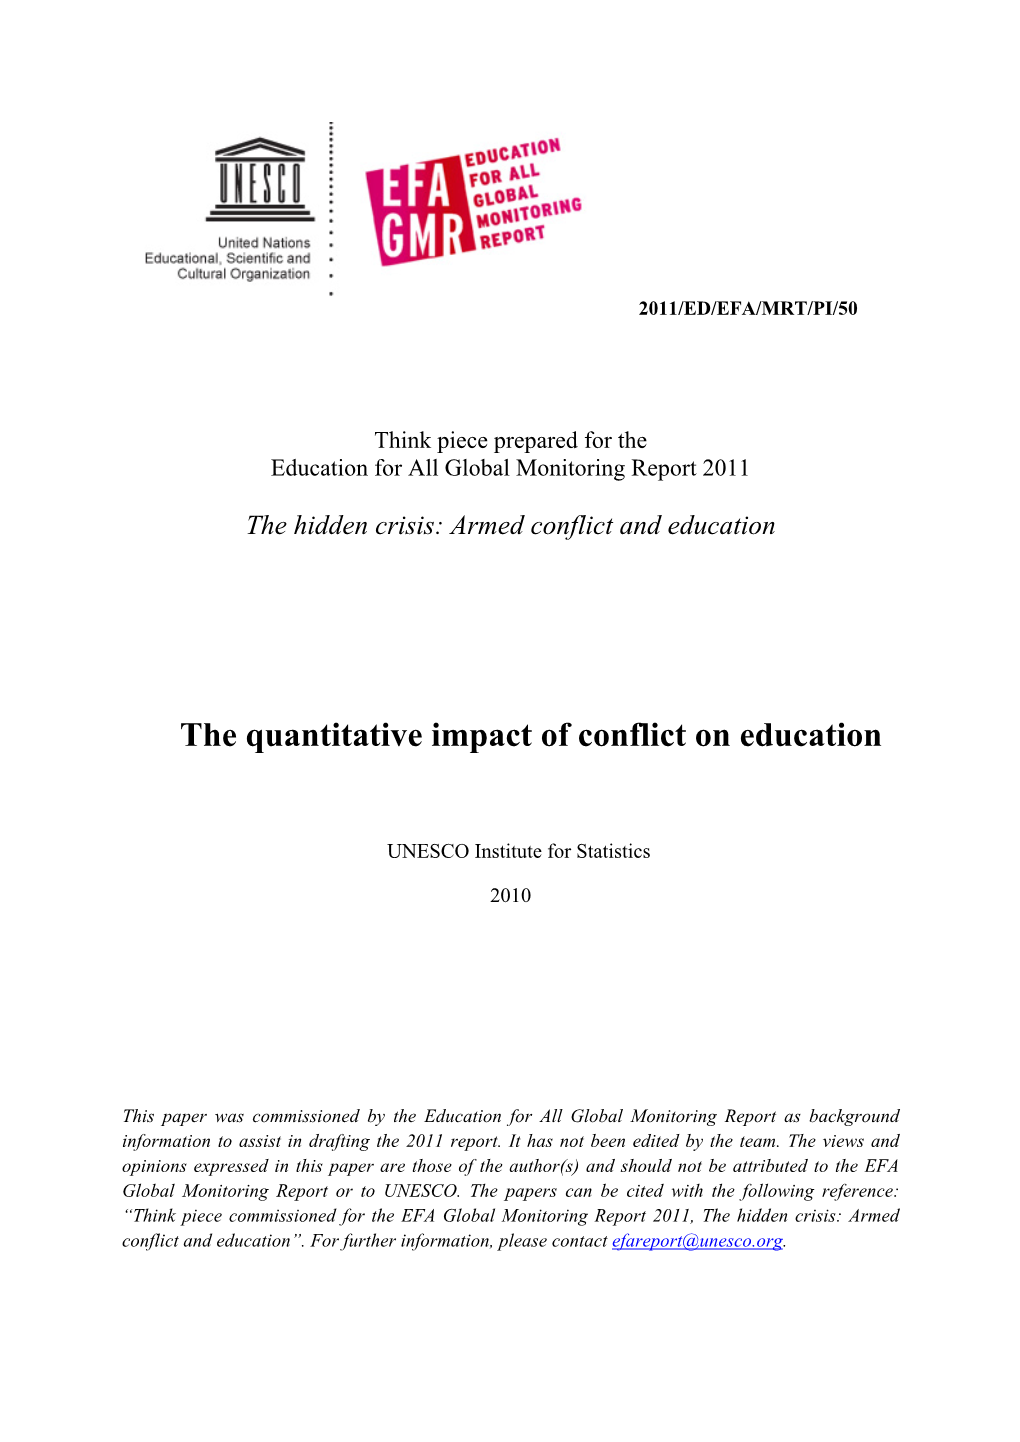 Think Piece: the Quantitative Impact of Conflict on Education